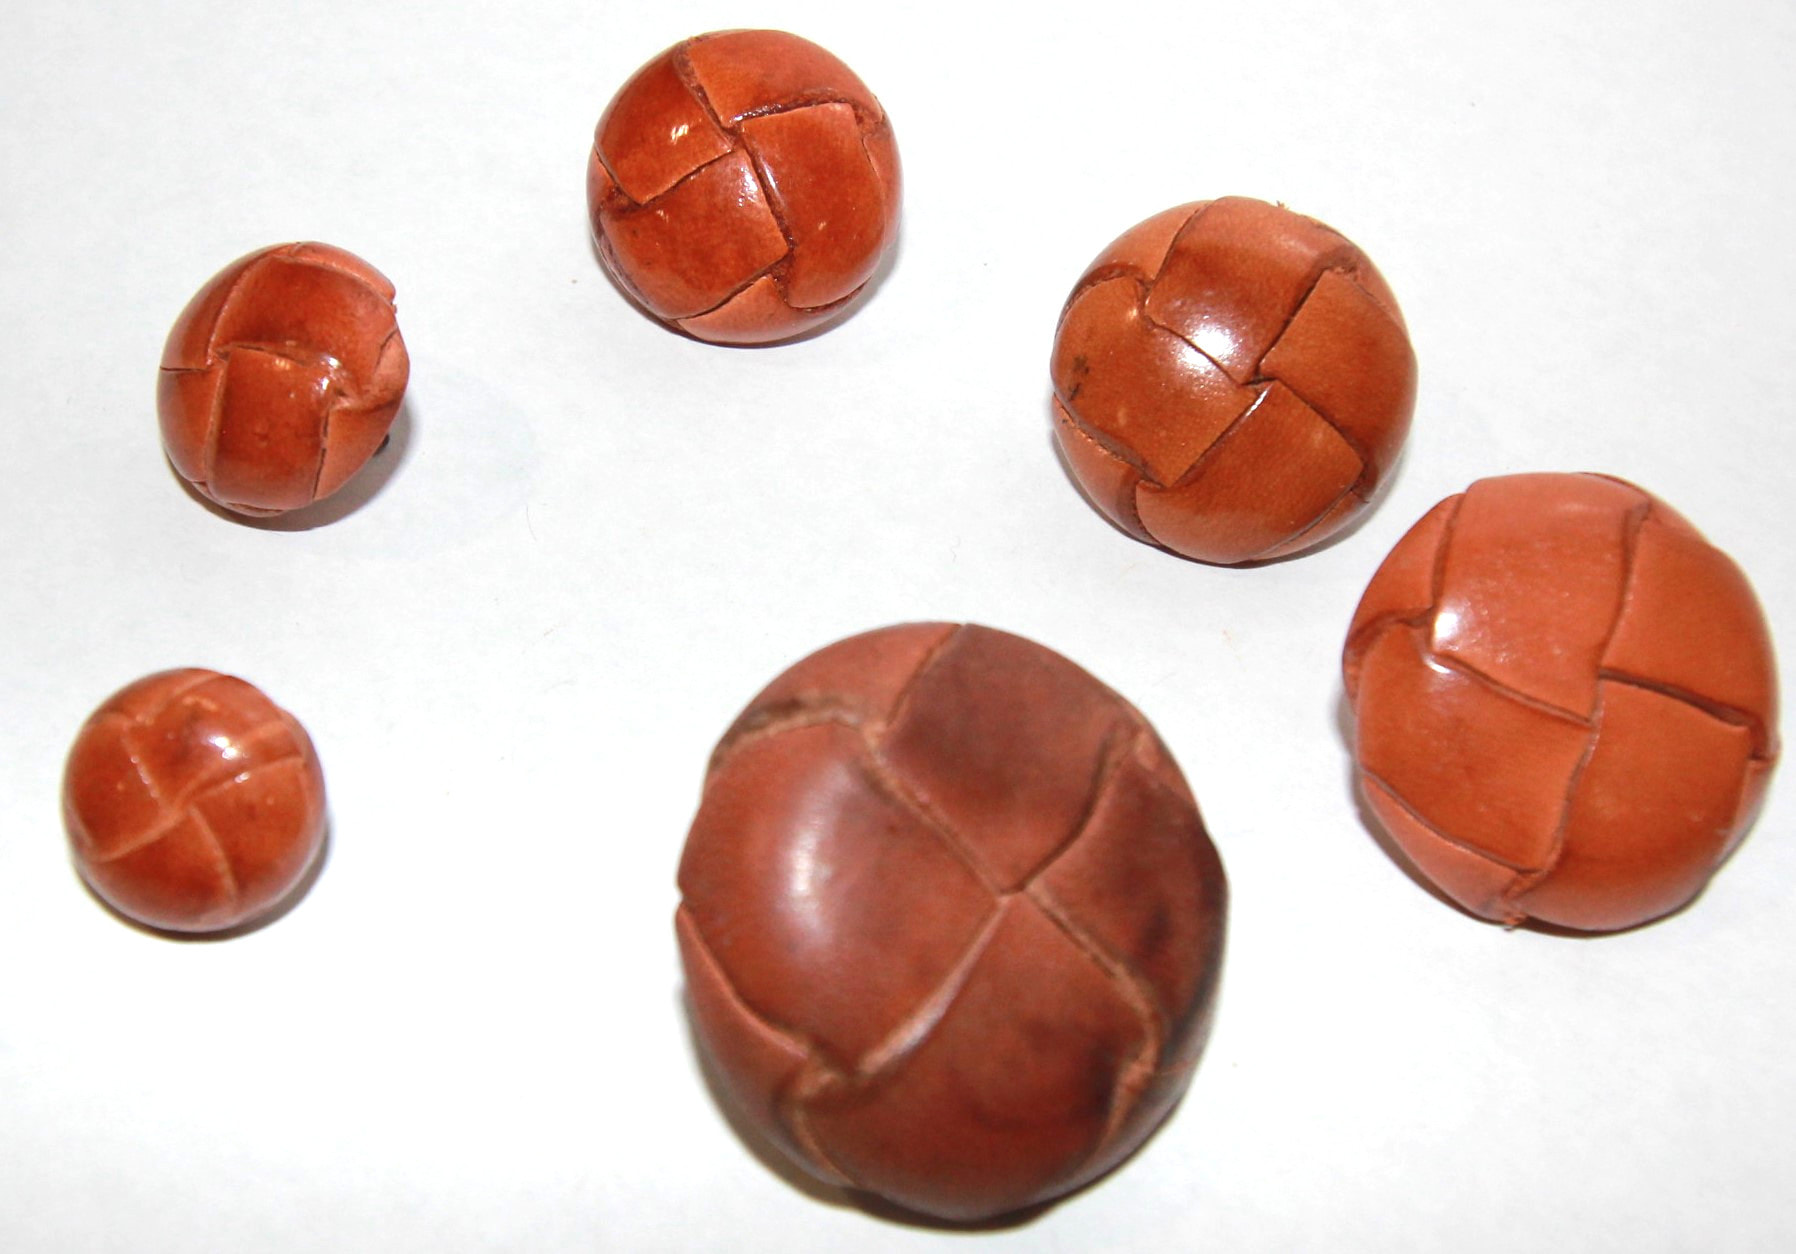 traditional-tan-leather-coat-buttons